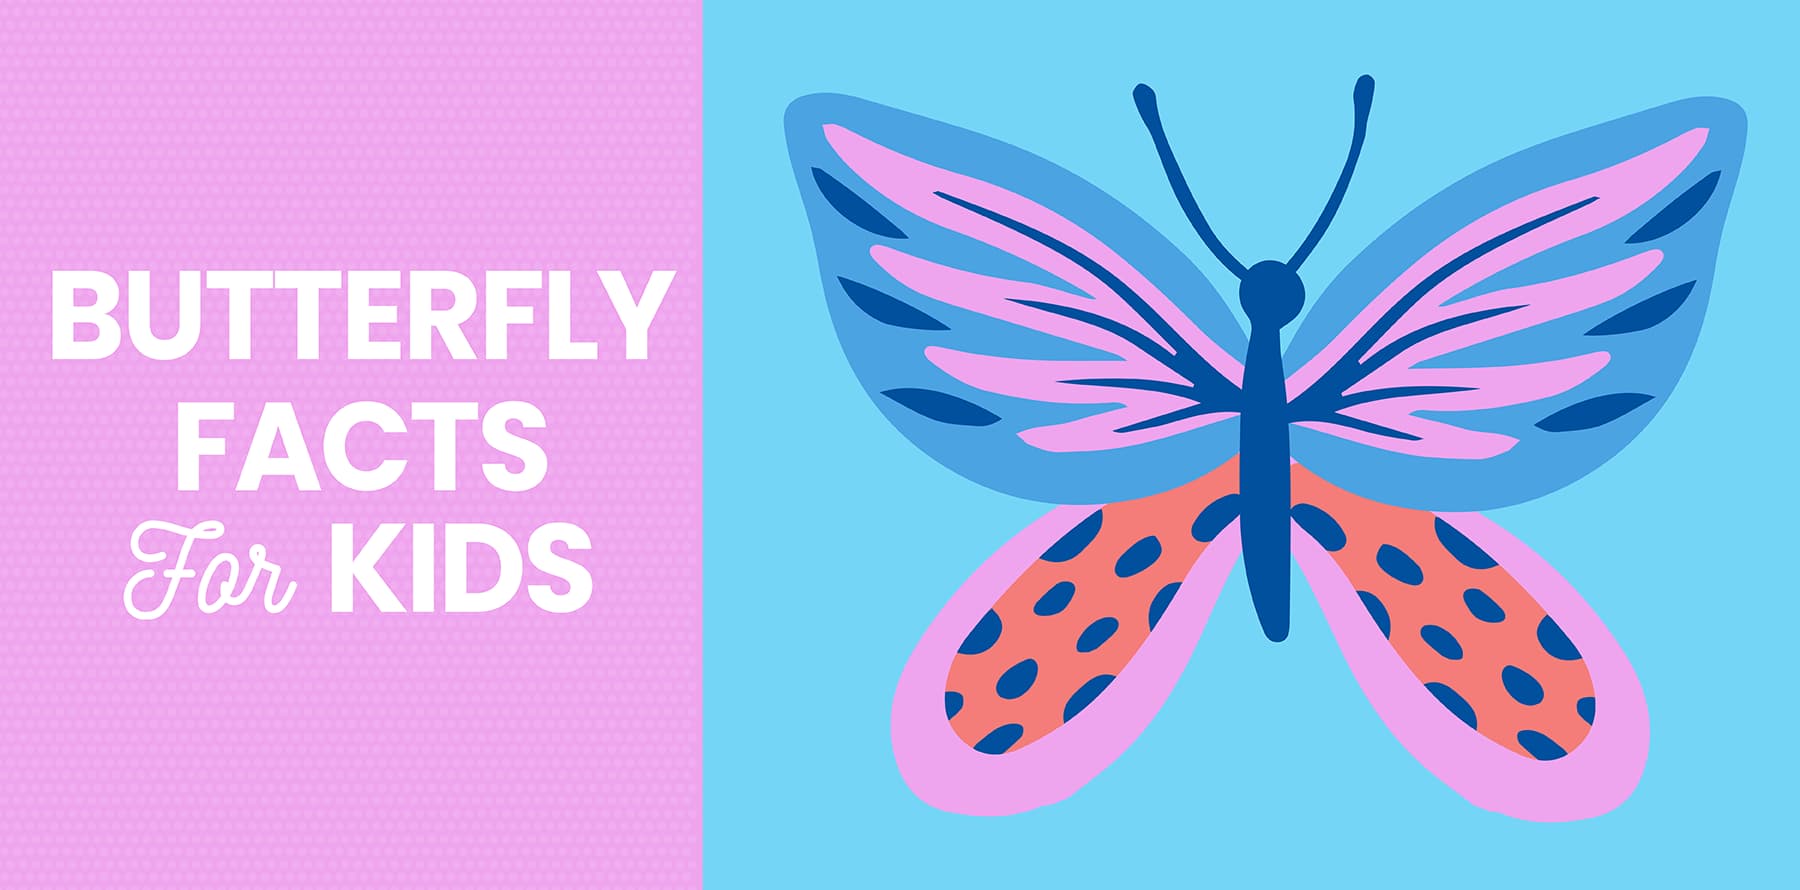 30 Butterfly Facts for Kids - Little Passports